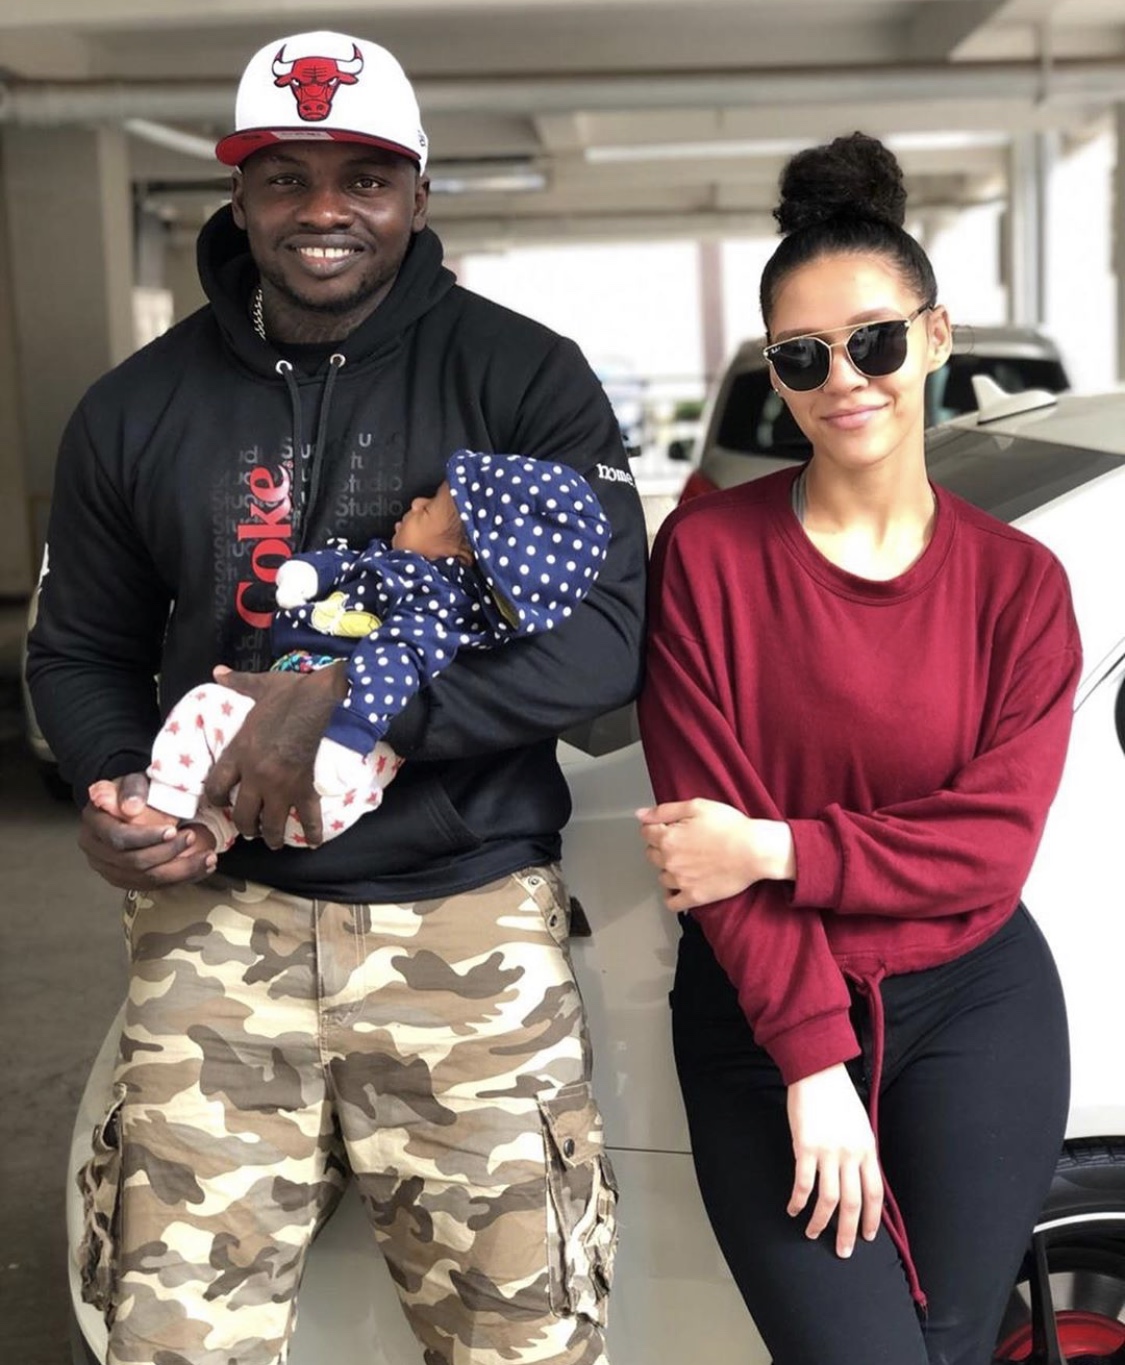 Relationship goals! Khaligragh Jones new amazing photos with his girlfriend and baby girl